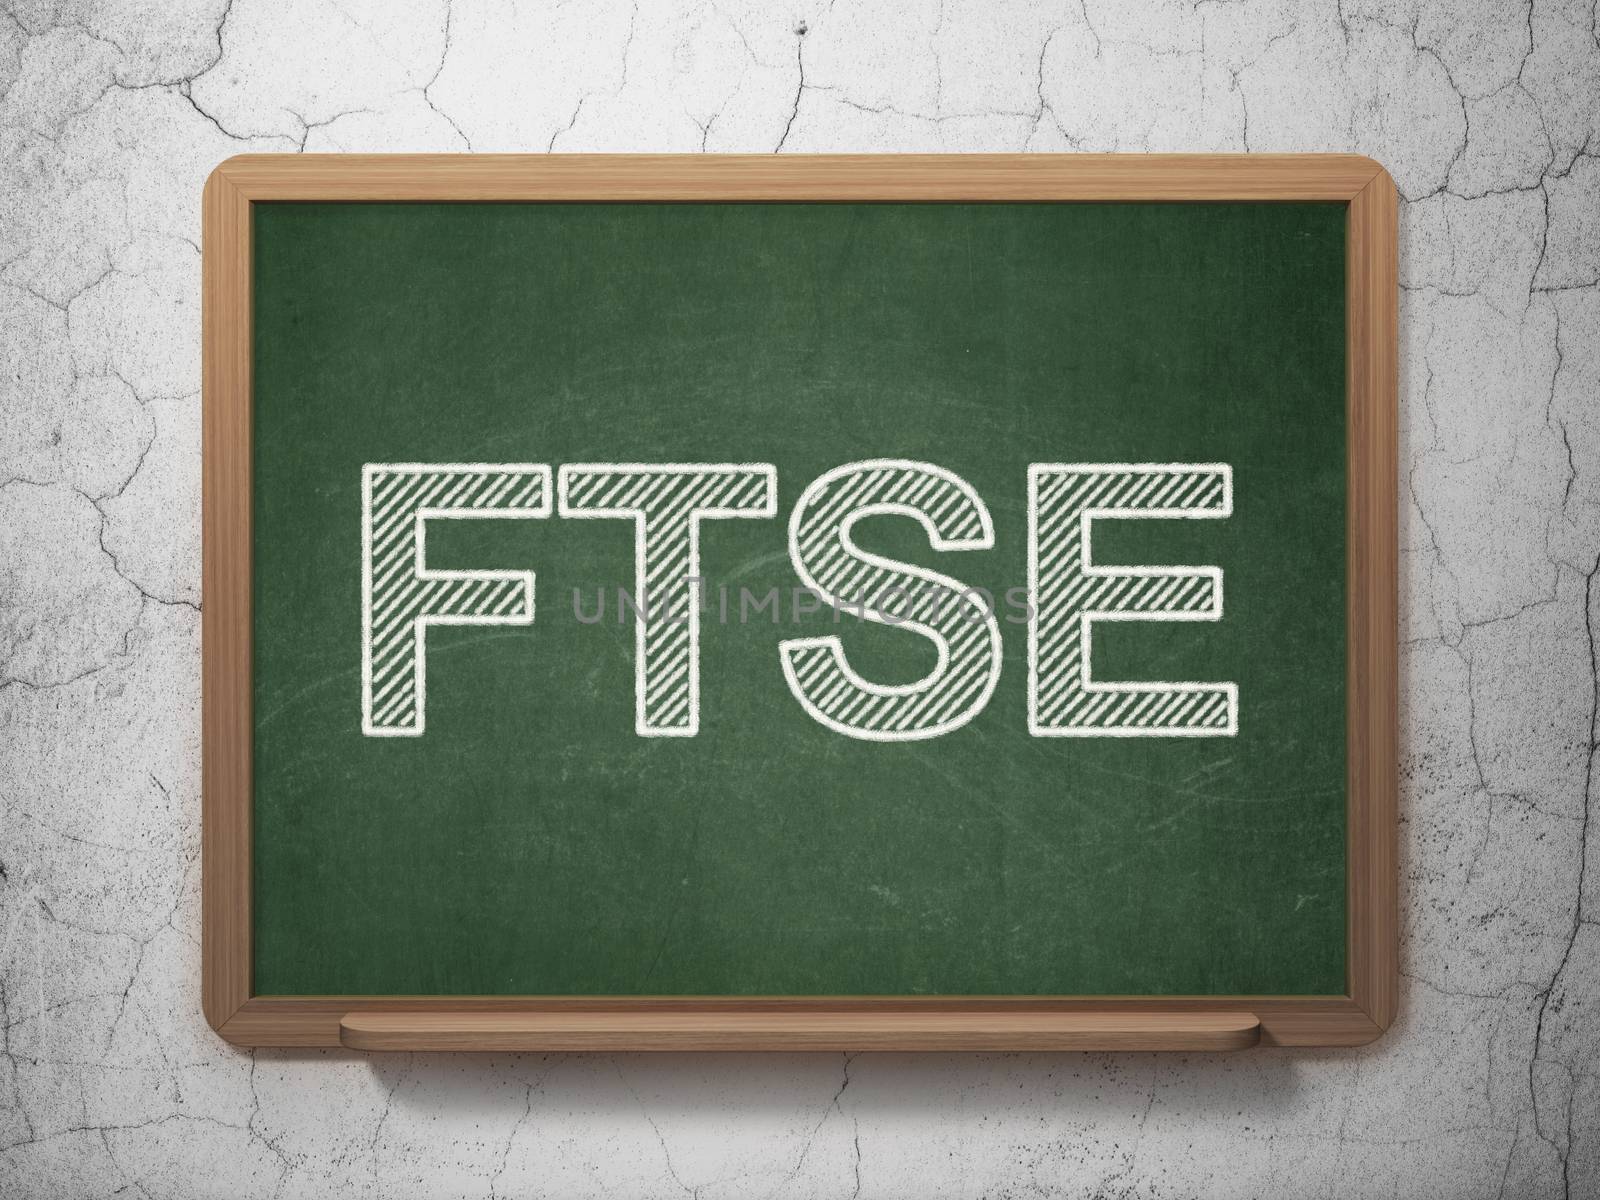 Stock market indexes concept: text FTSE on Green chalkboard on grunge wall background, 3D rendering